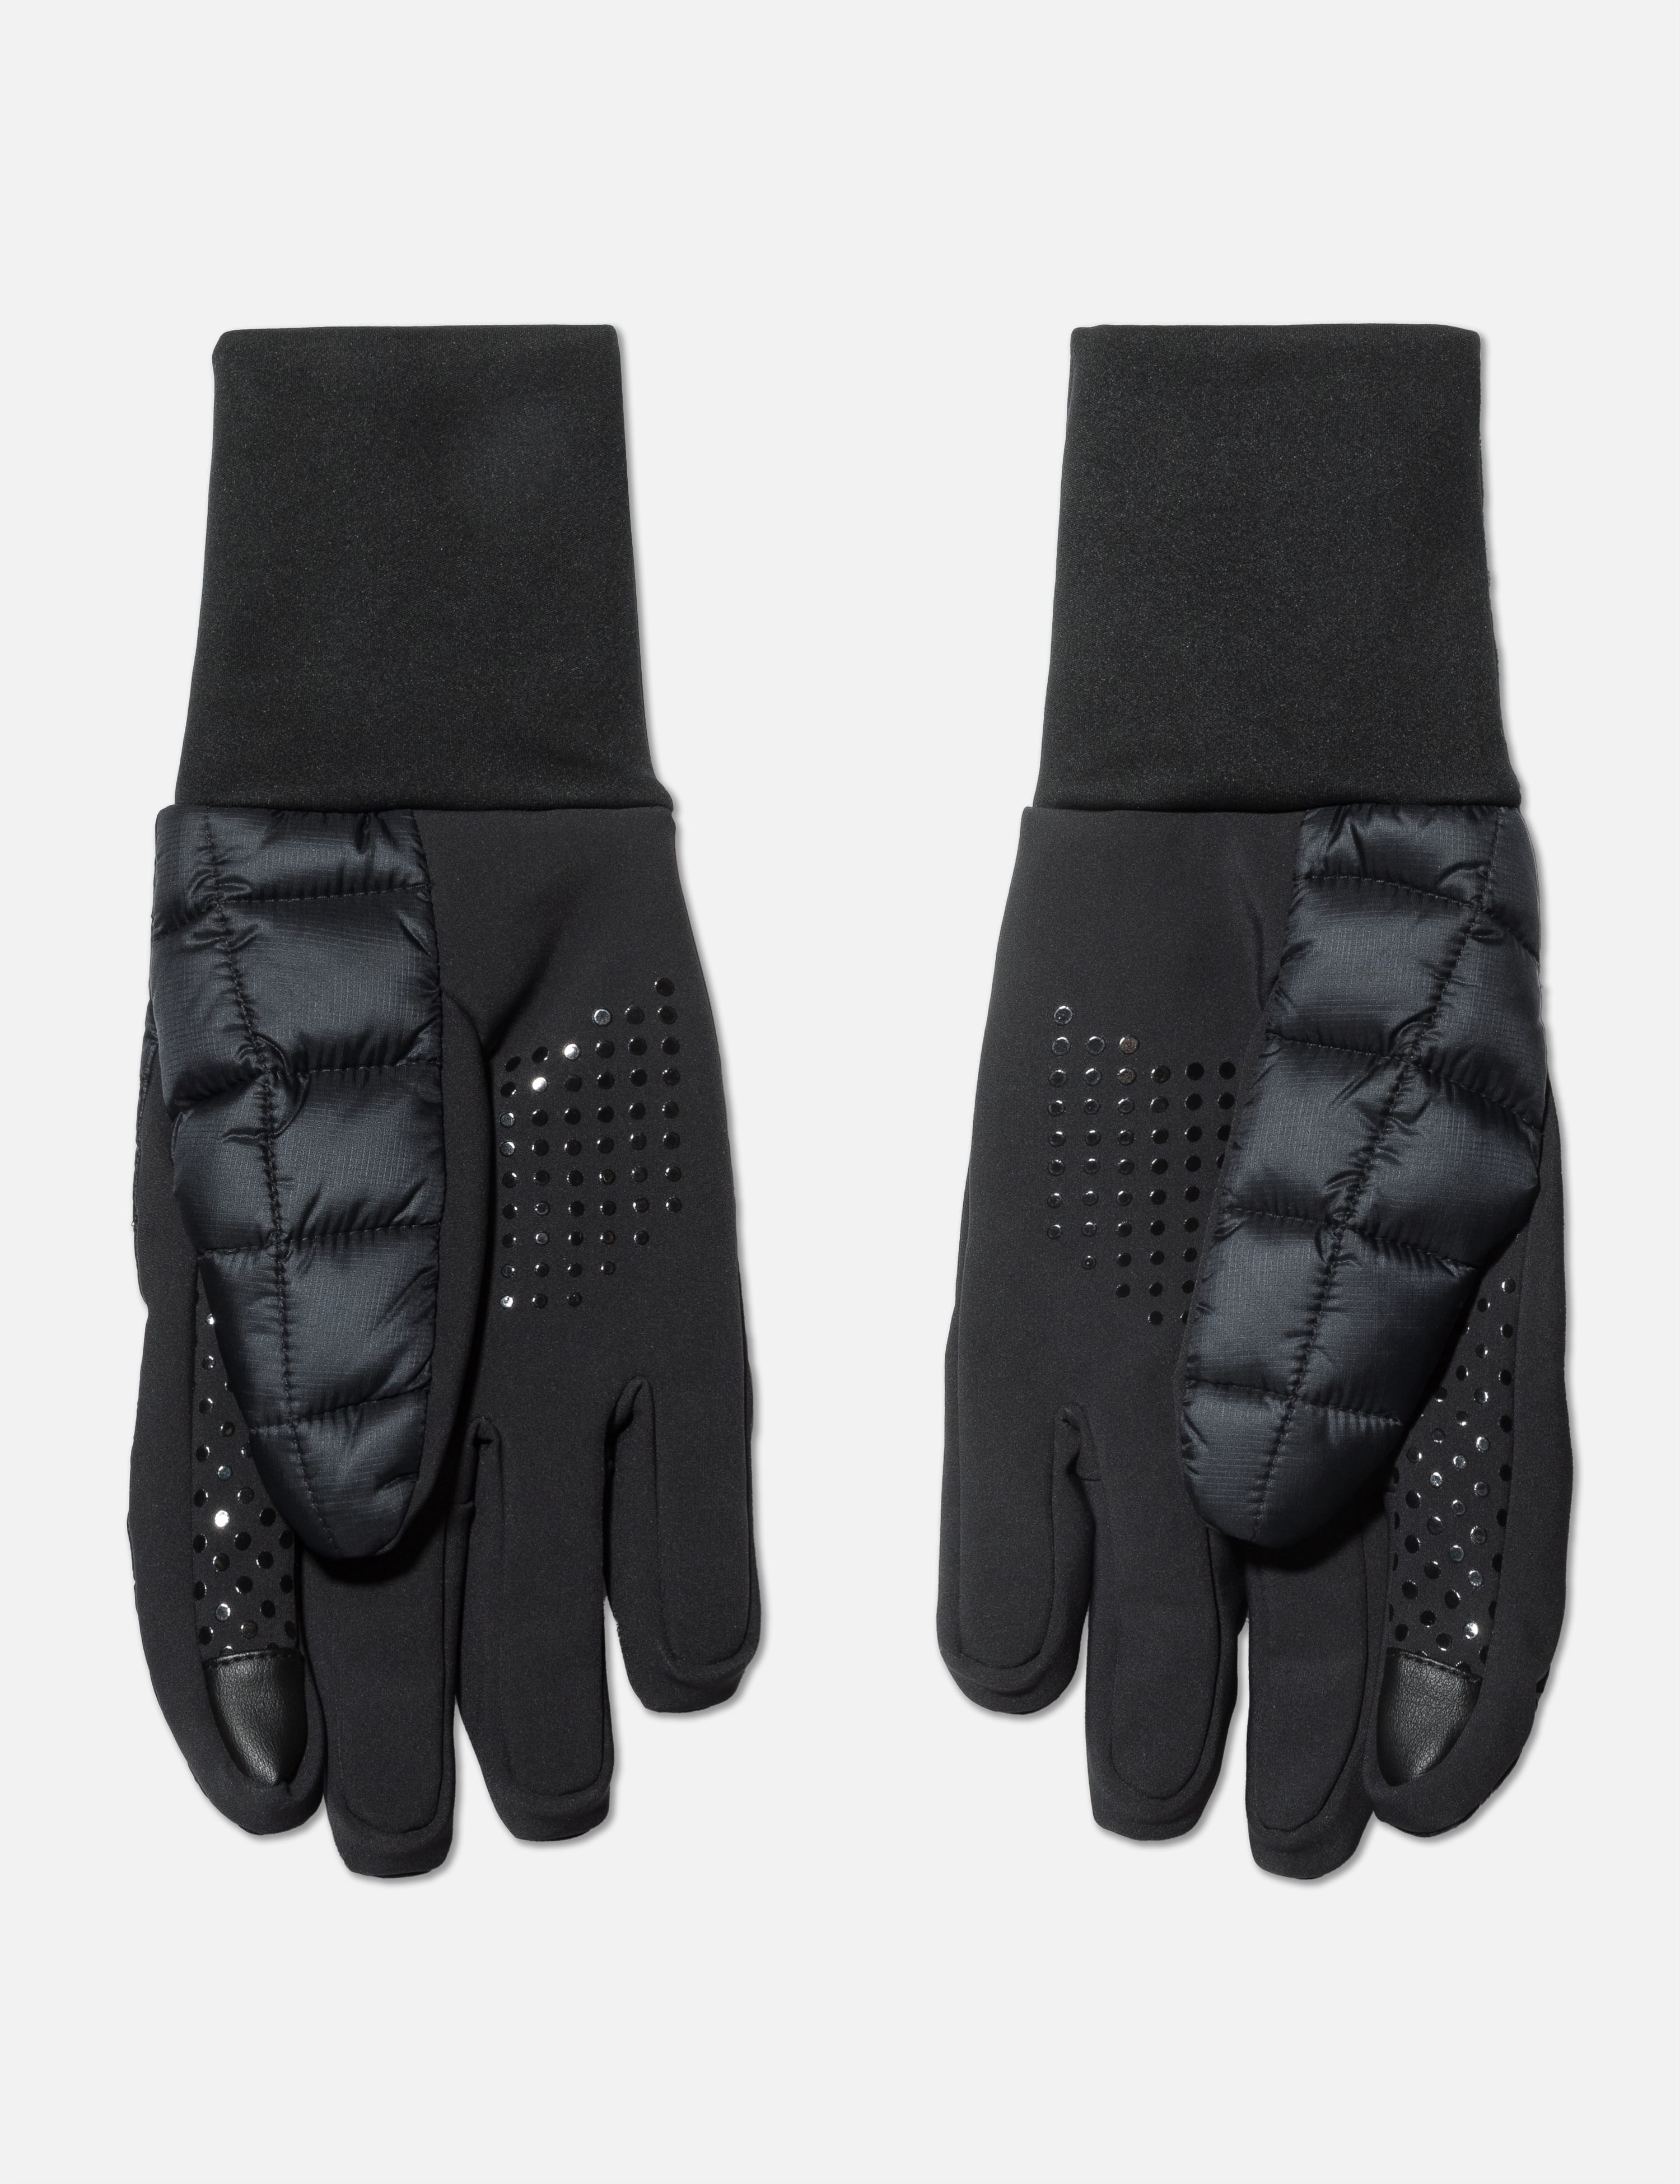 Canada Goose - Northern Liner Glove | HBX - Globally Curated 